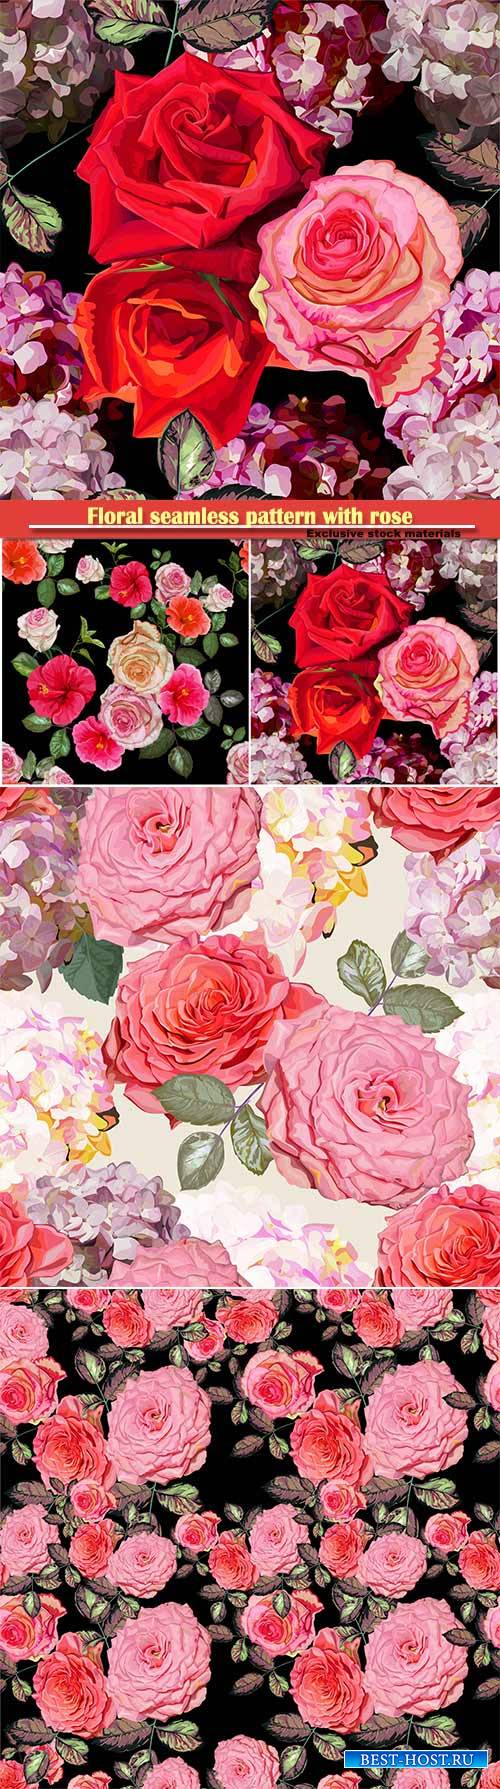 Floral seamless pattern with rose and hydrangea vector illustration